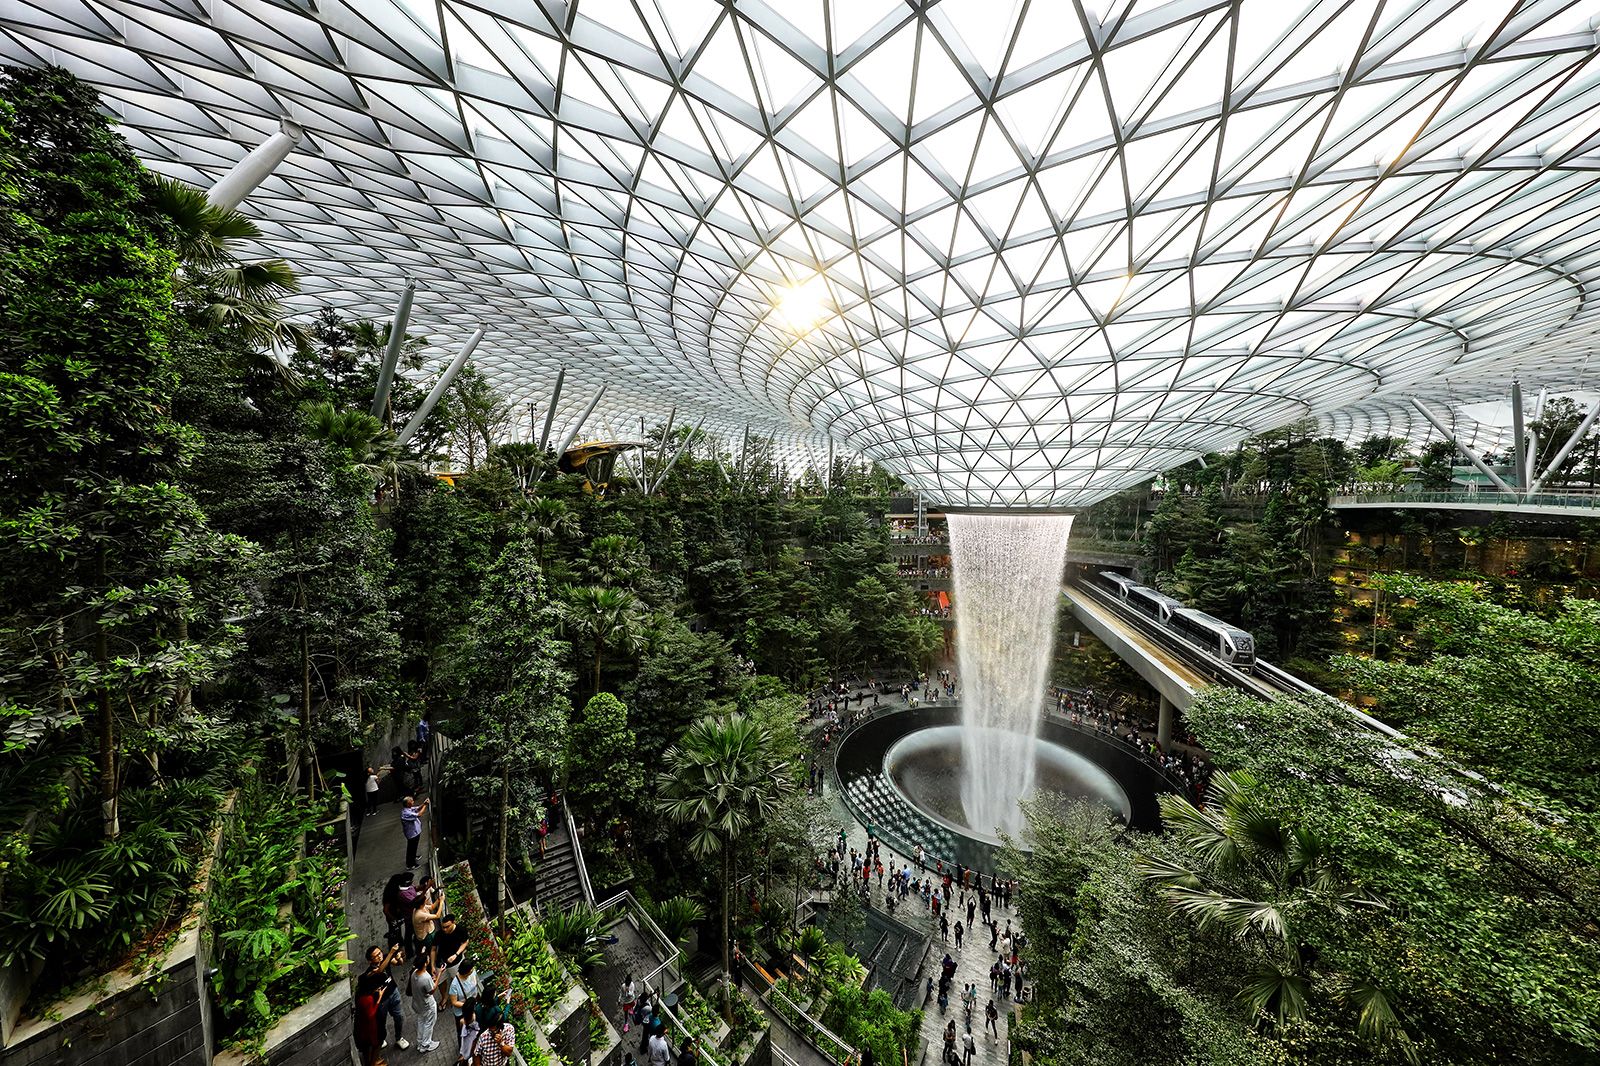 Singapore's Changi Airport Jewel expansion is redefining the airport